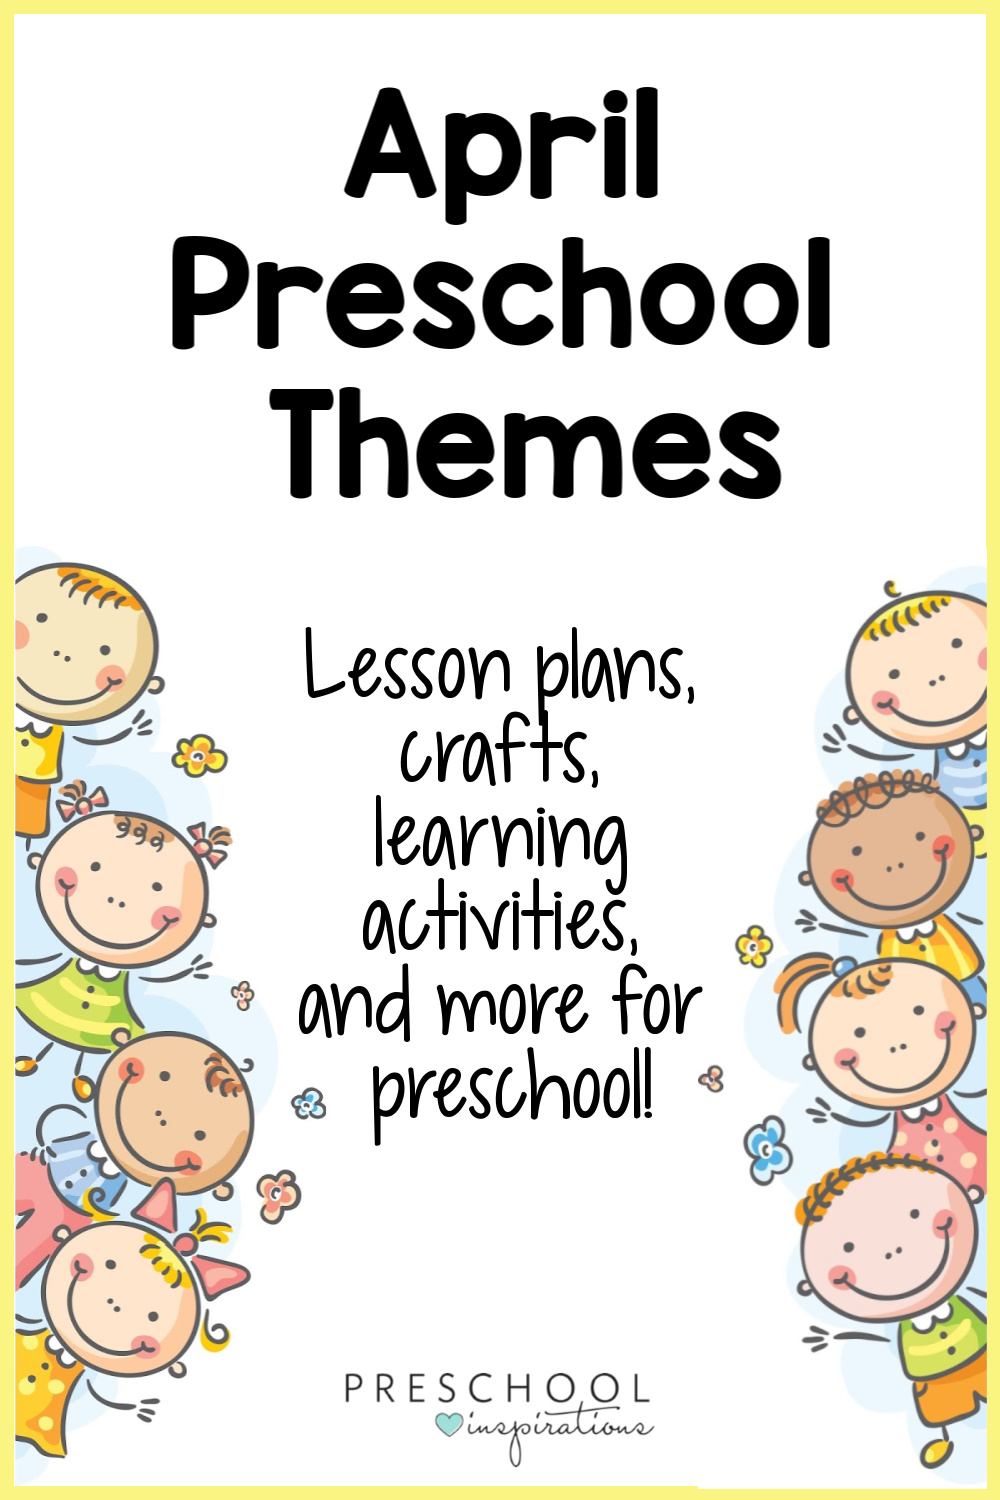 Everything you need to teach preschool this April using themes! Here's lesson plans, crafts, learning activities, and many more ideas for teaching this spring.